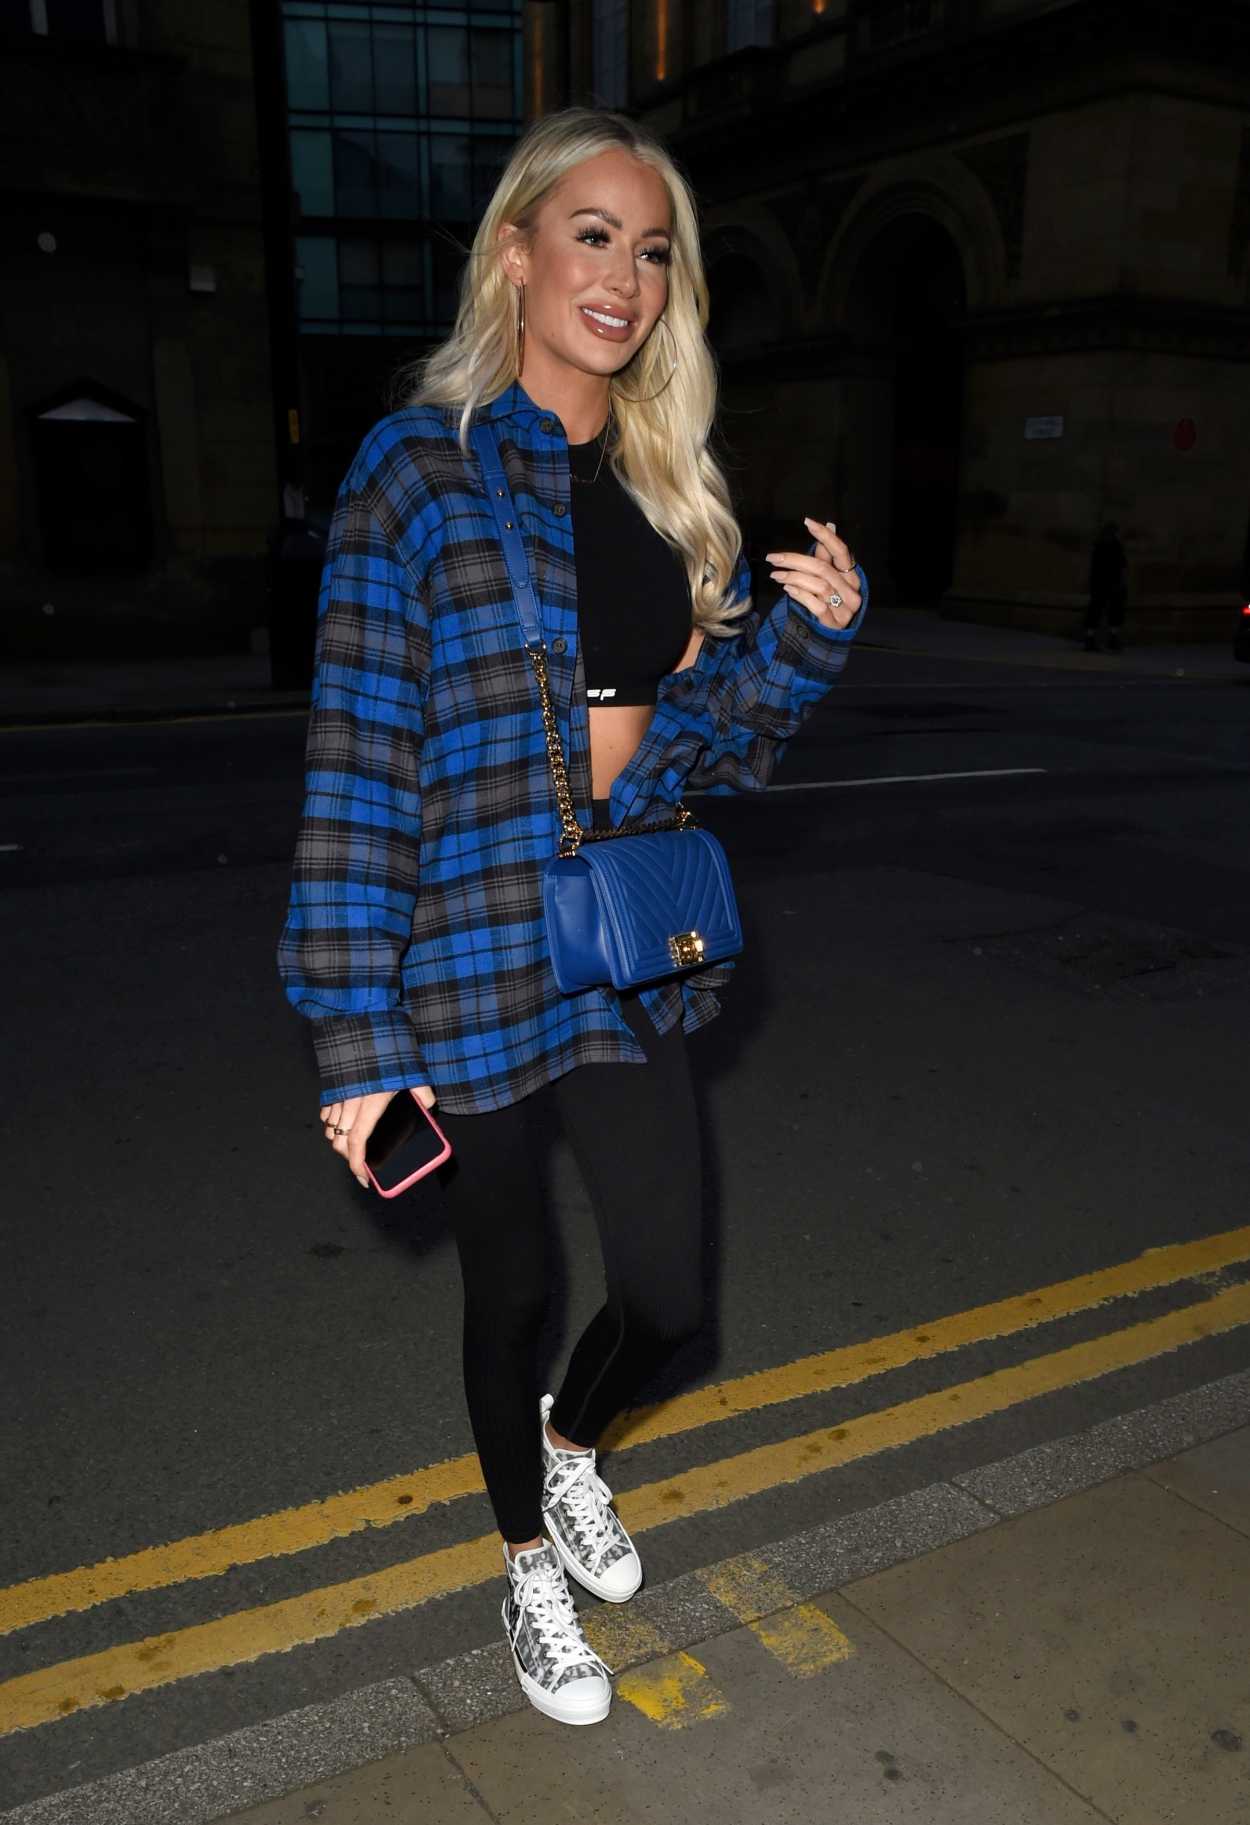 Olivia Attwood in a Plaid Shirt